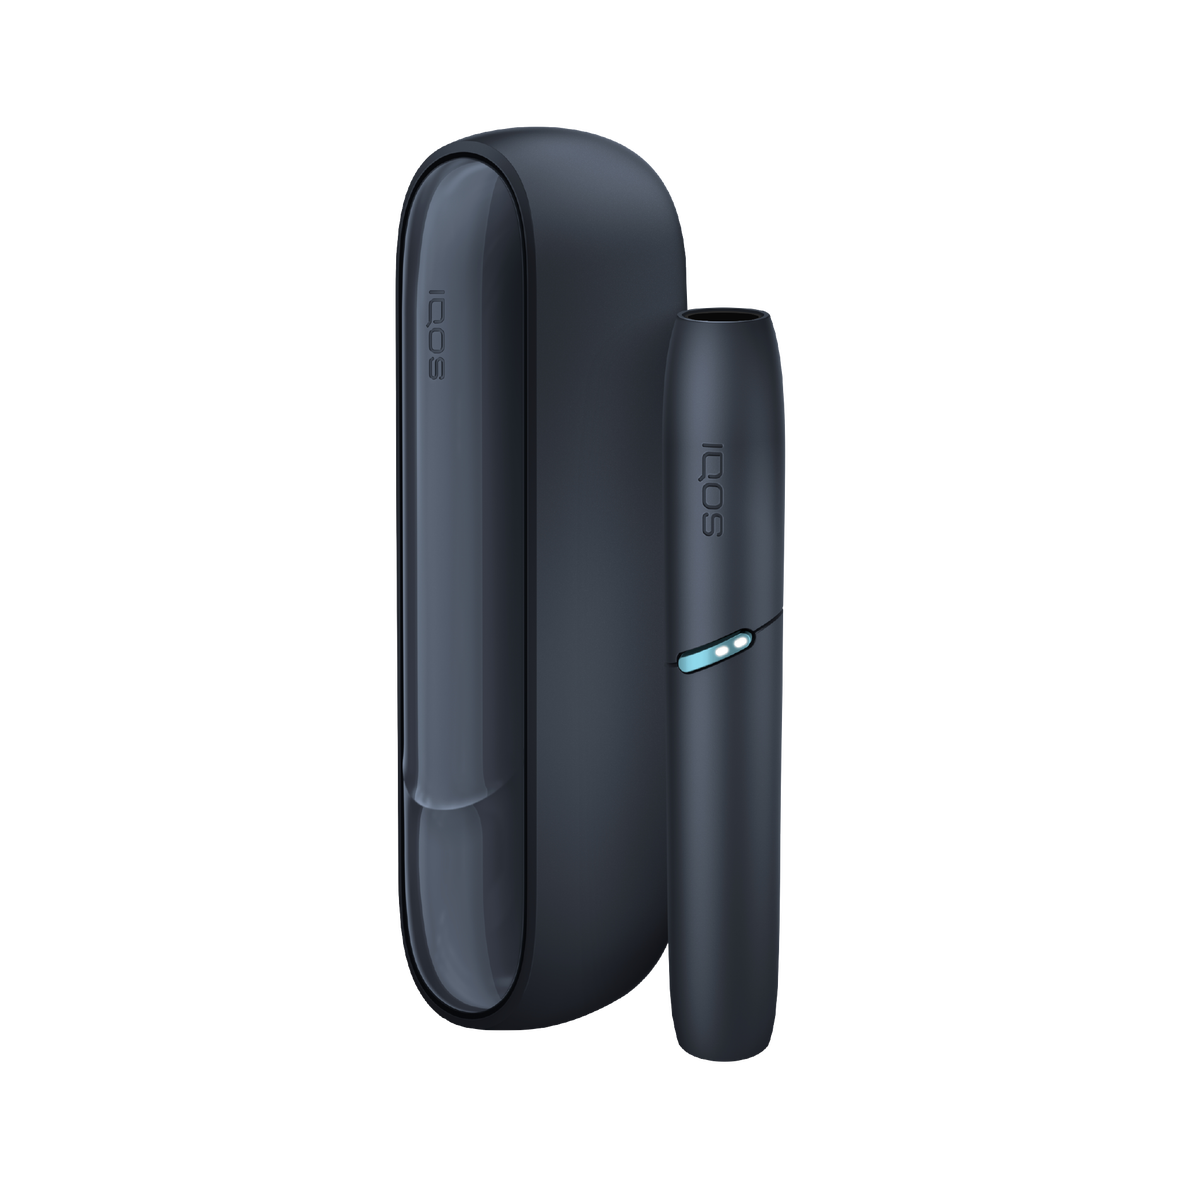 Imágenes IQOS DUO y IQOS ONE 1000 x 1000 px_IQOS DUO-04.png